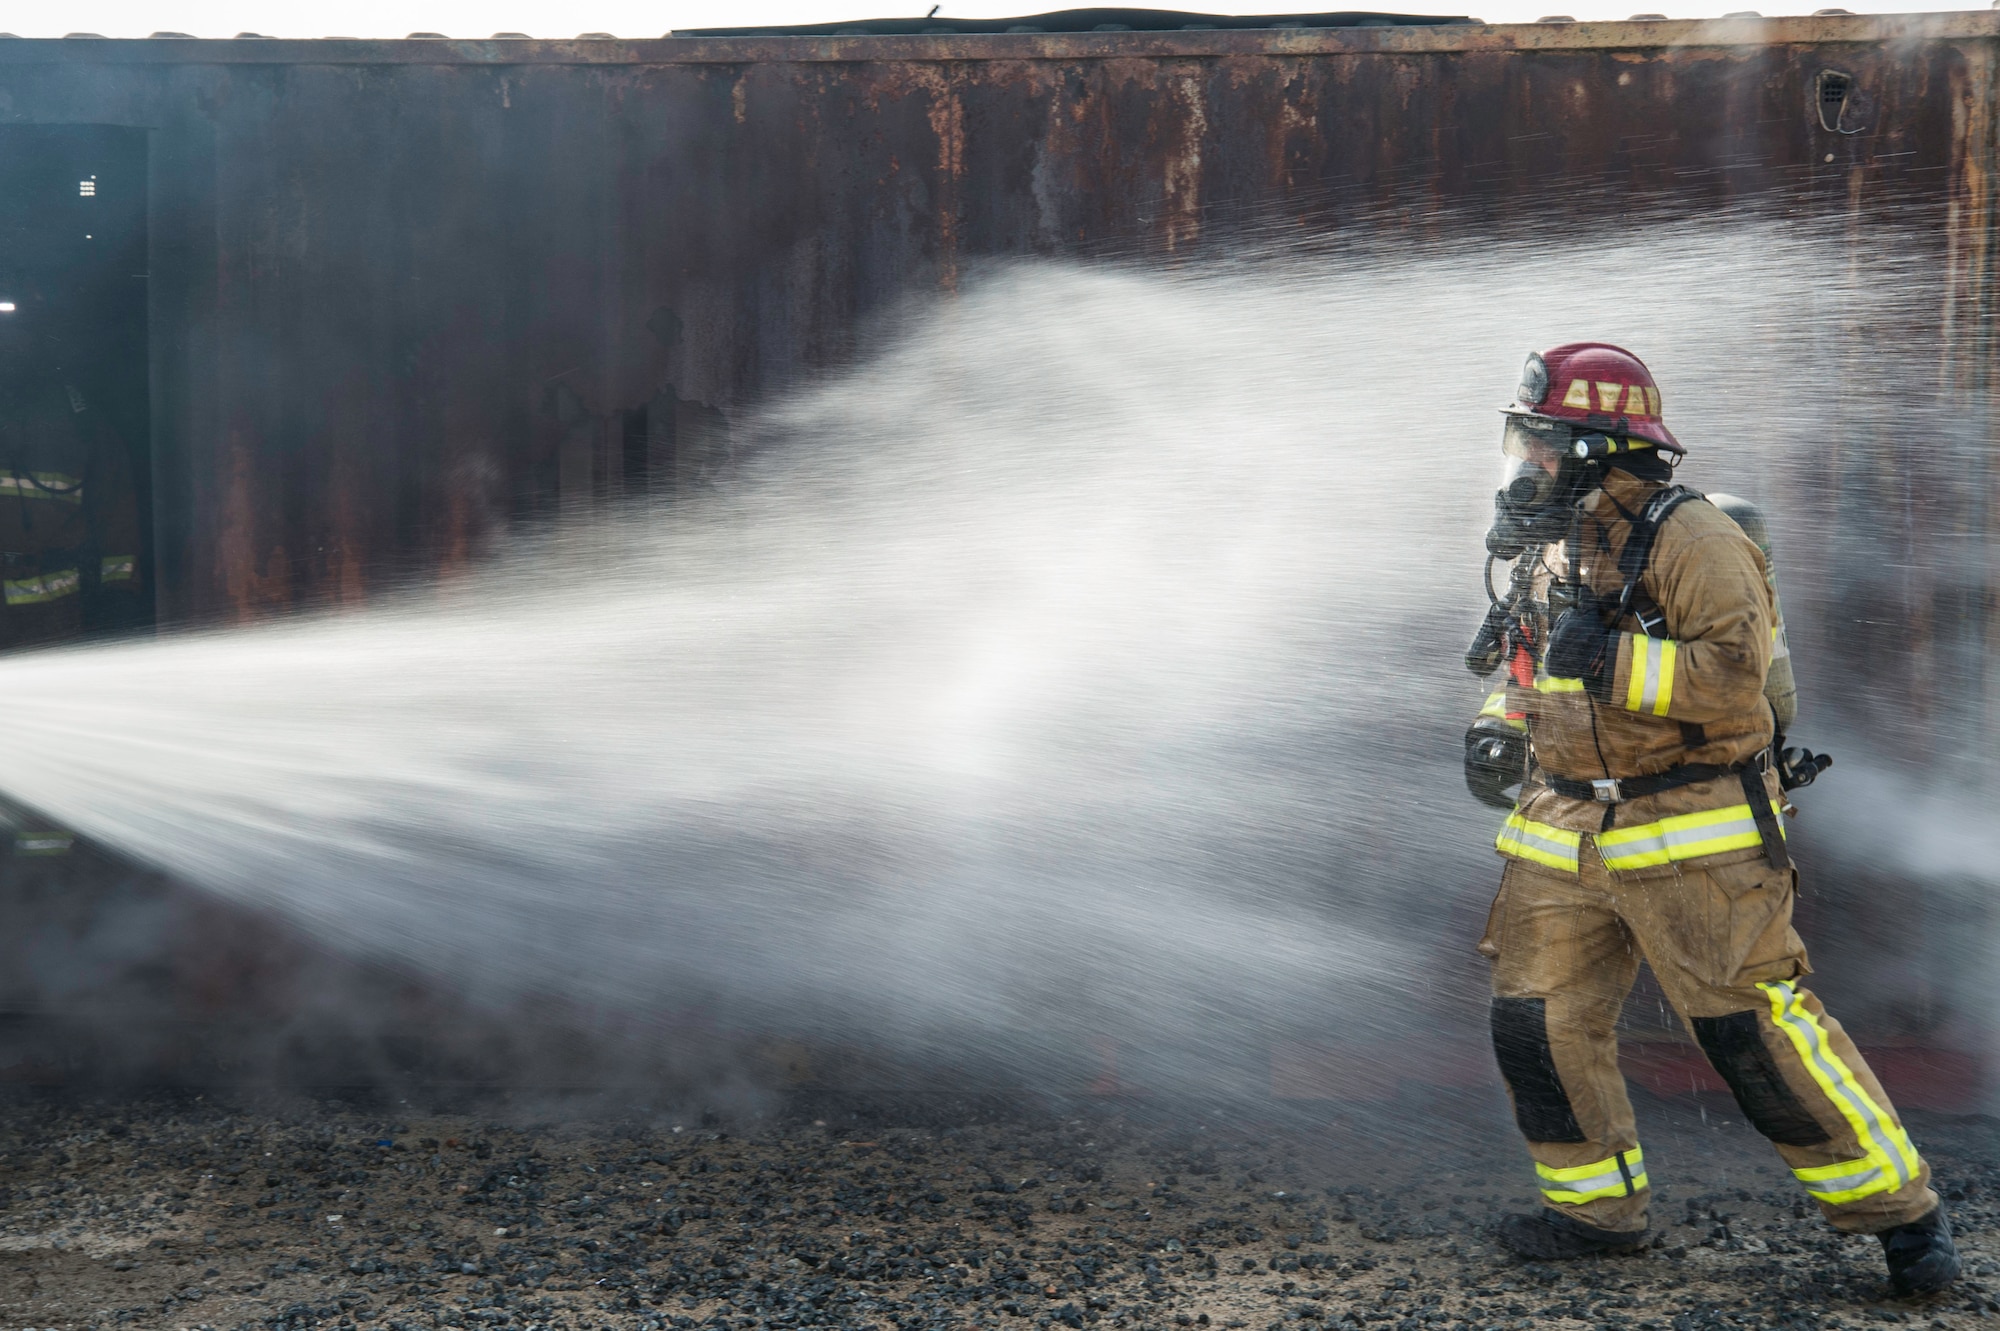 A fire fighter from the 386th Expeditionary Civil Engineer Squadron Fire Department is hosed down after exiting a live fire training facility at an undisclosed location in Southwest Asia, Oct. 20, 2017. The training was a coordinated effort with various units on base to ensure Airmen's safety was upheld and mission capability was not interrupted. (Air Force photo by Staff Sgt. William Banton)